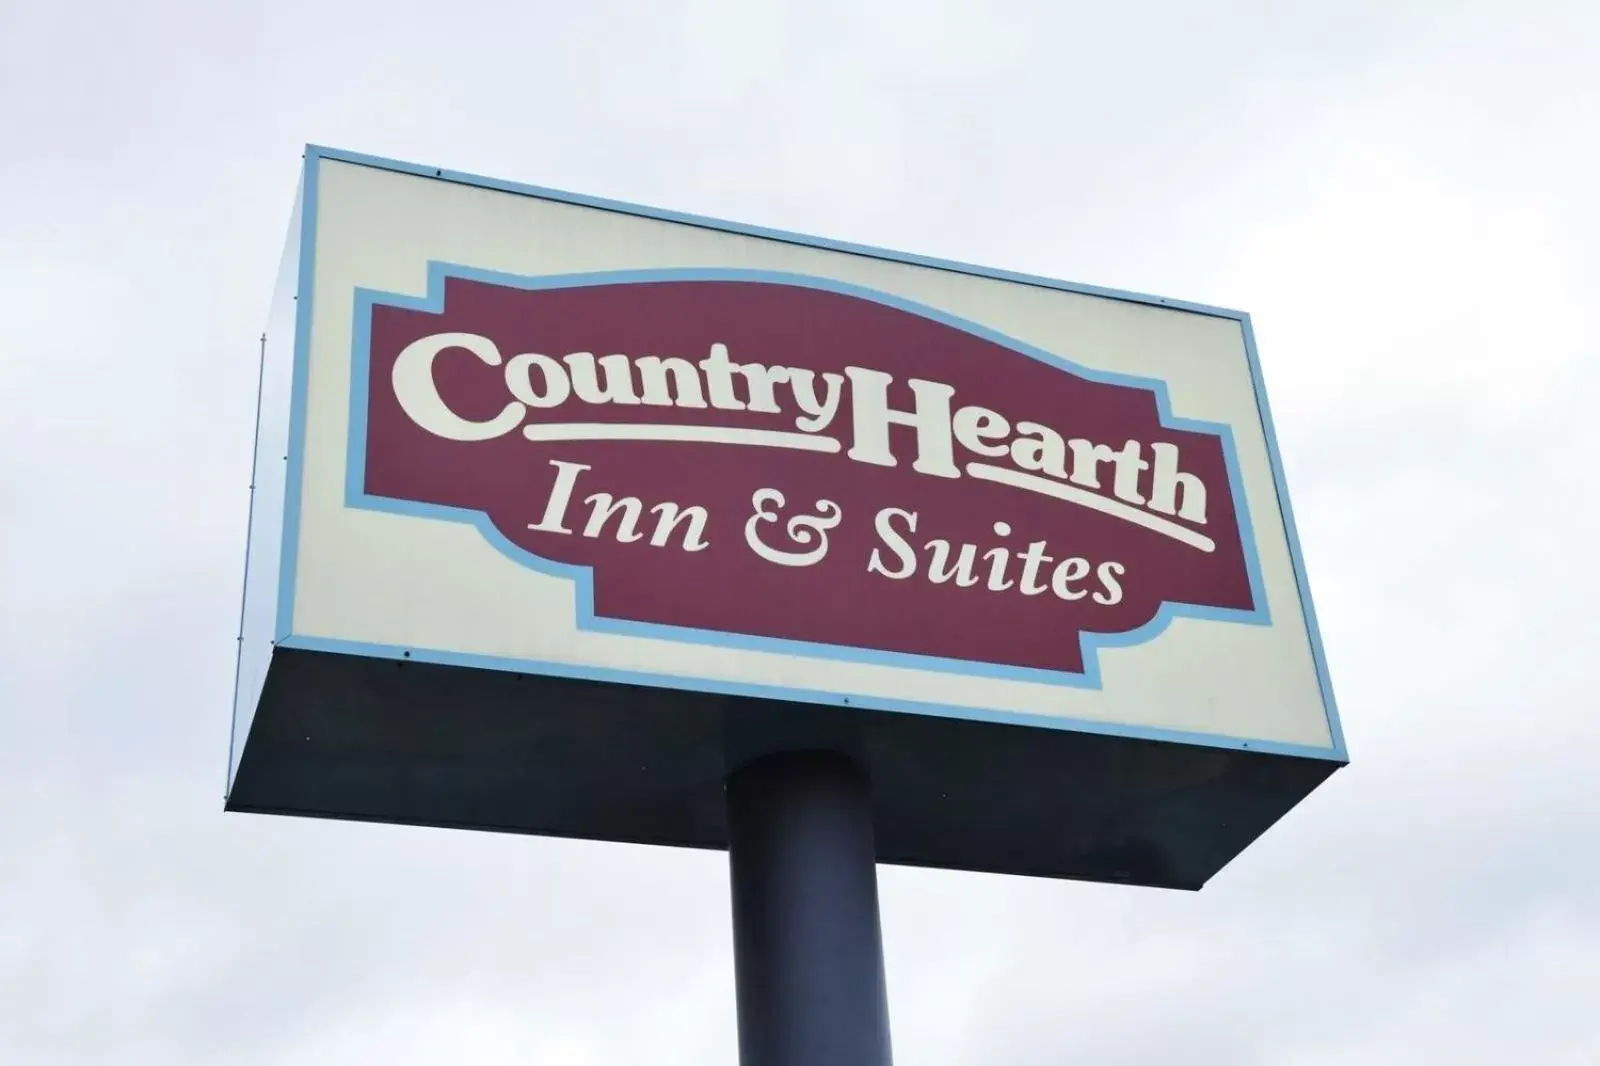 Property logo or sign in Country Hearth Inn & Suites - Kenton